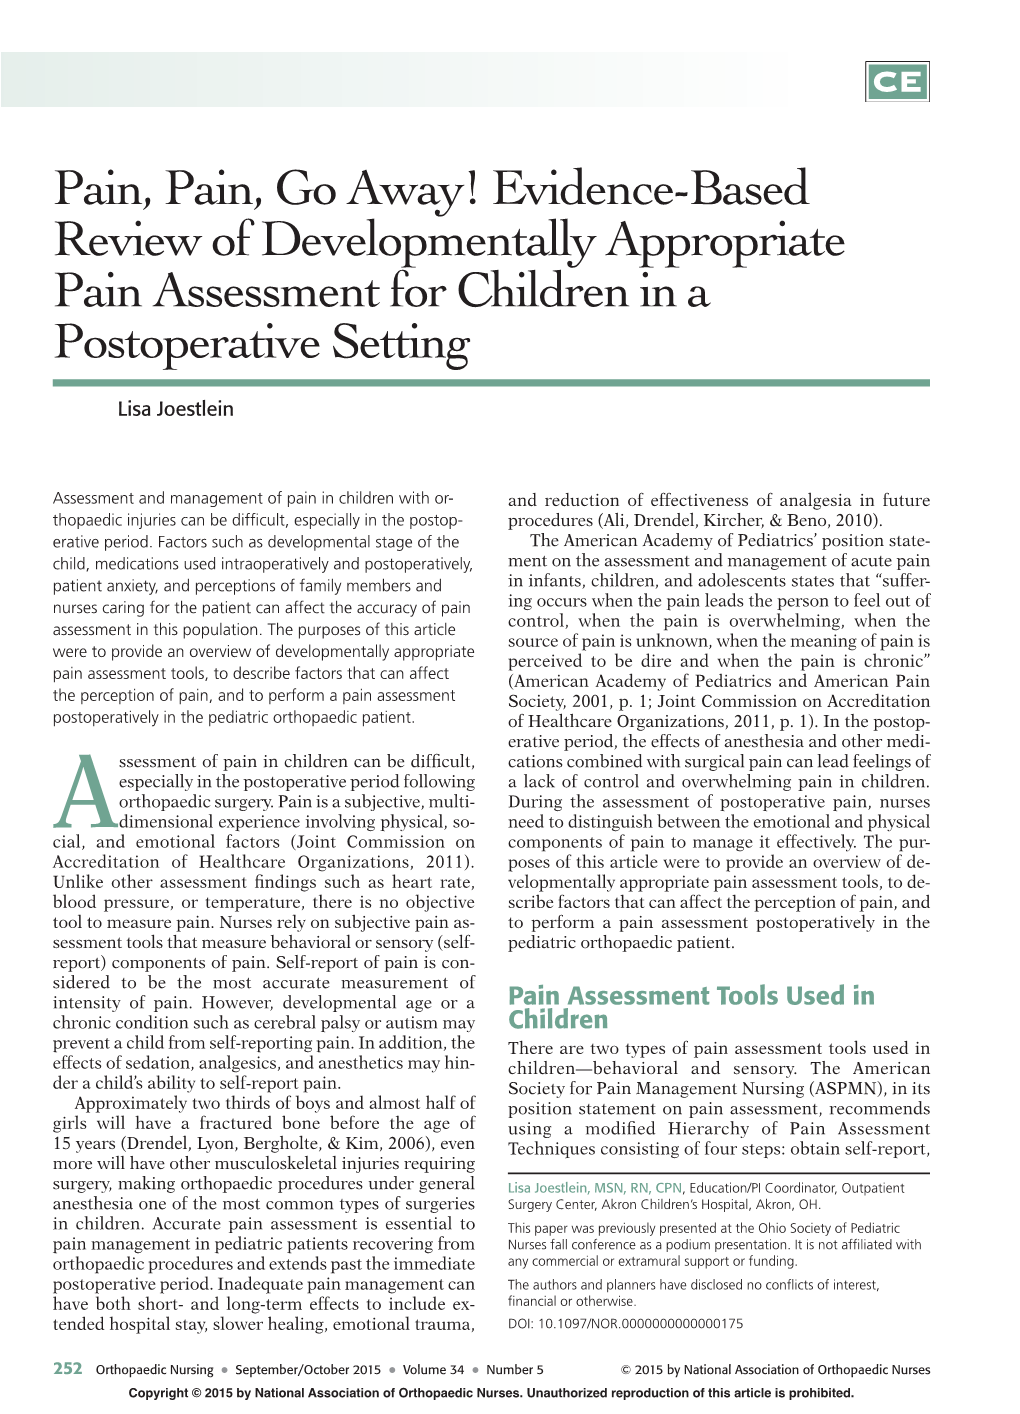 Evidence-Based Review of Developmentally Appropriate Pain Assessment for Children in a Postoperative Setting